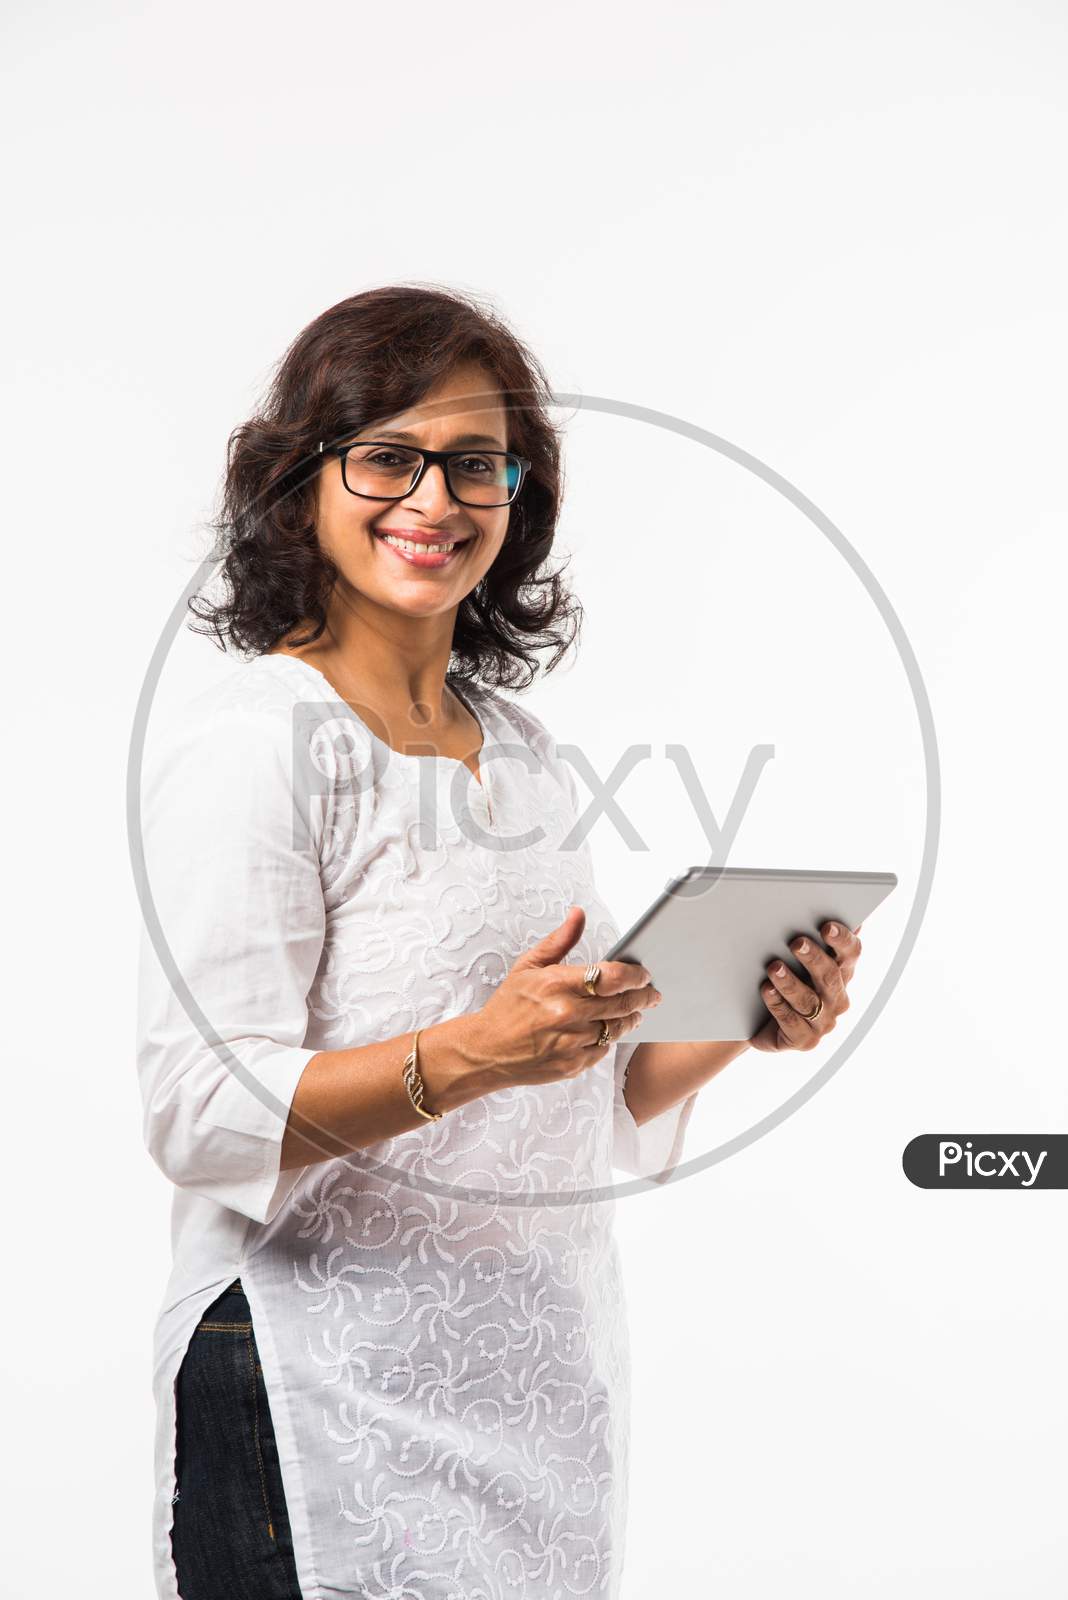 indian lady/women using tablet pc while standing isolated over white background, selective focus